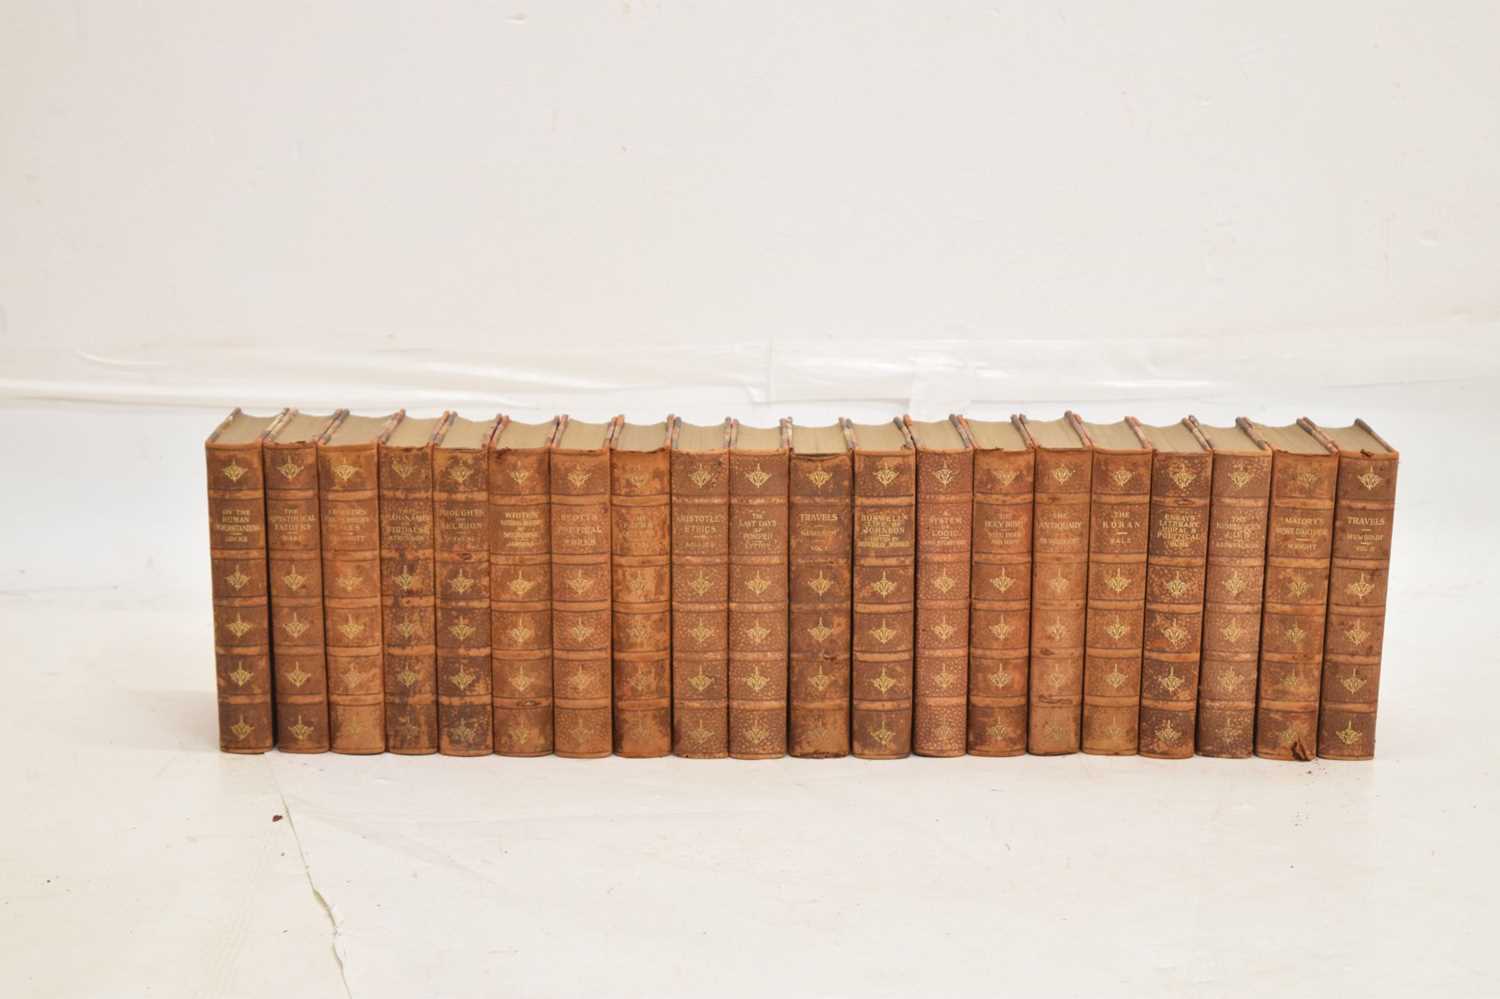 Twenty volumes from 'Sir John Lubbock's Hundred Books', leather bound, circa 1898 - Image 2 of 10